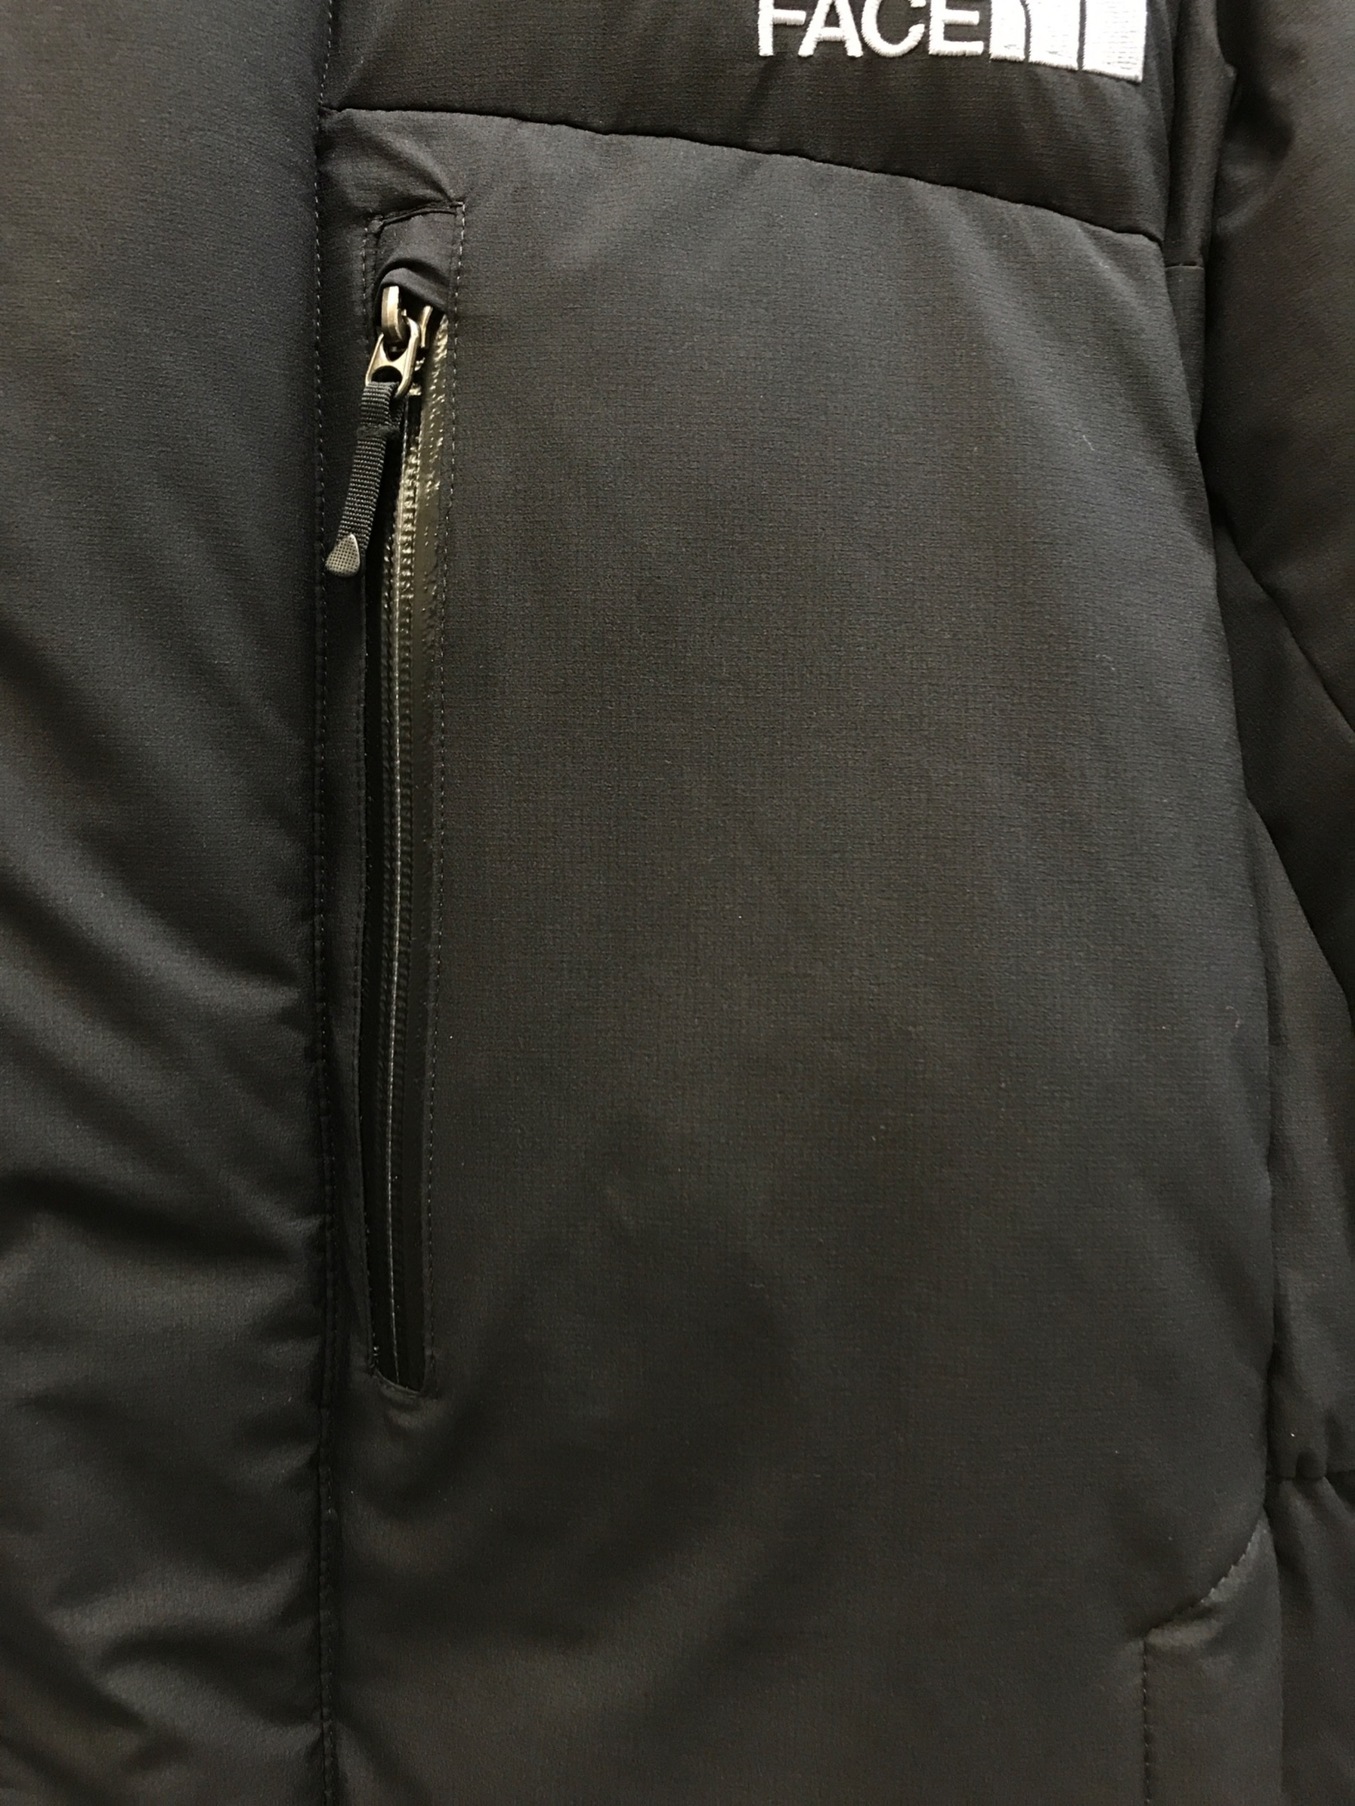 THE NORTH FACE◇BALTRO LIGHT JACKET バルトロライトジャケット/XS